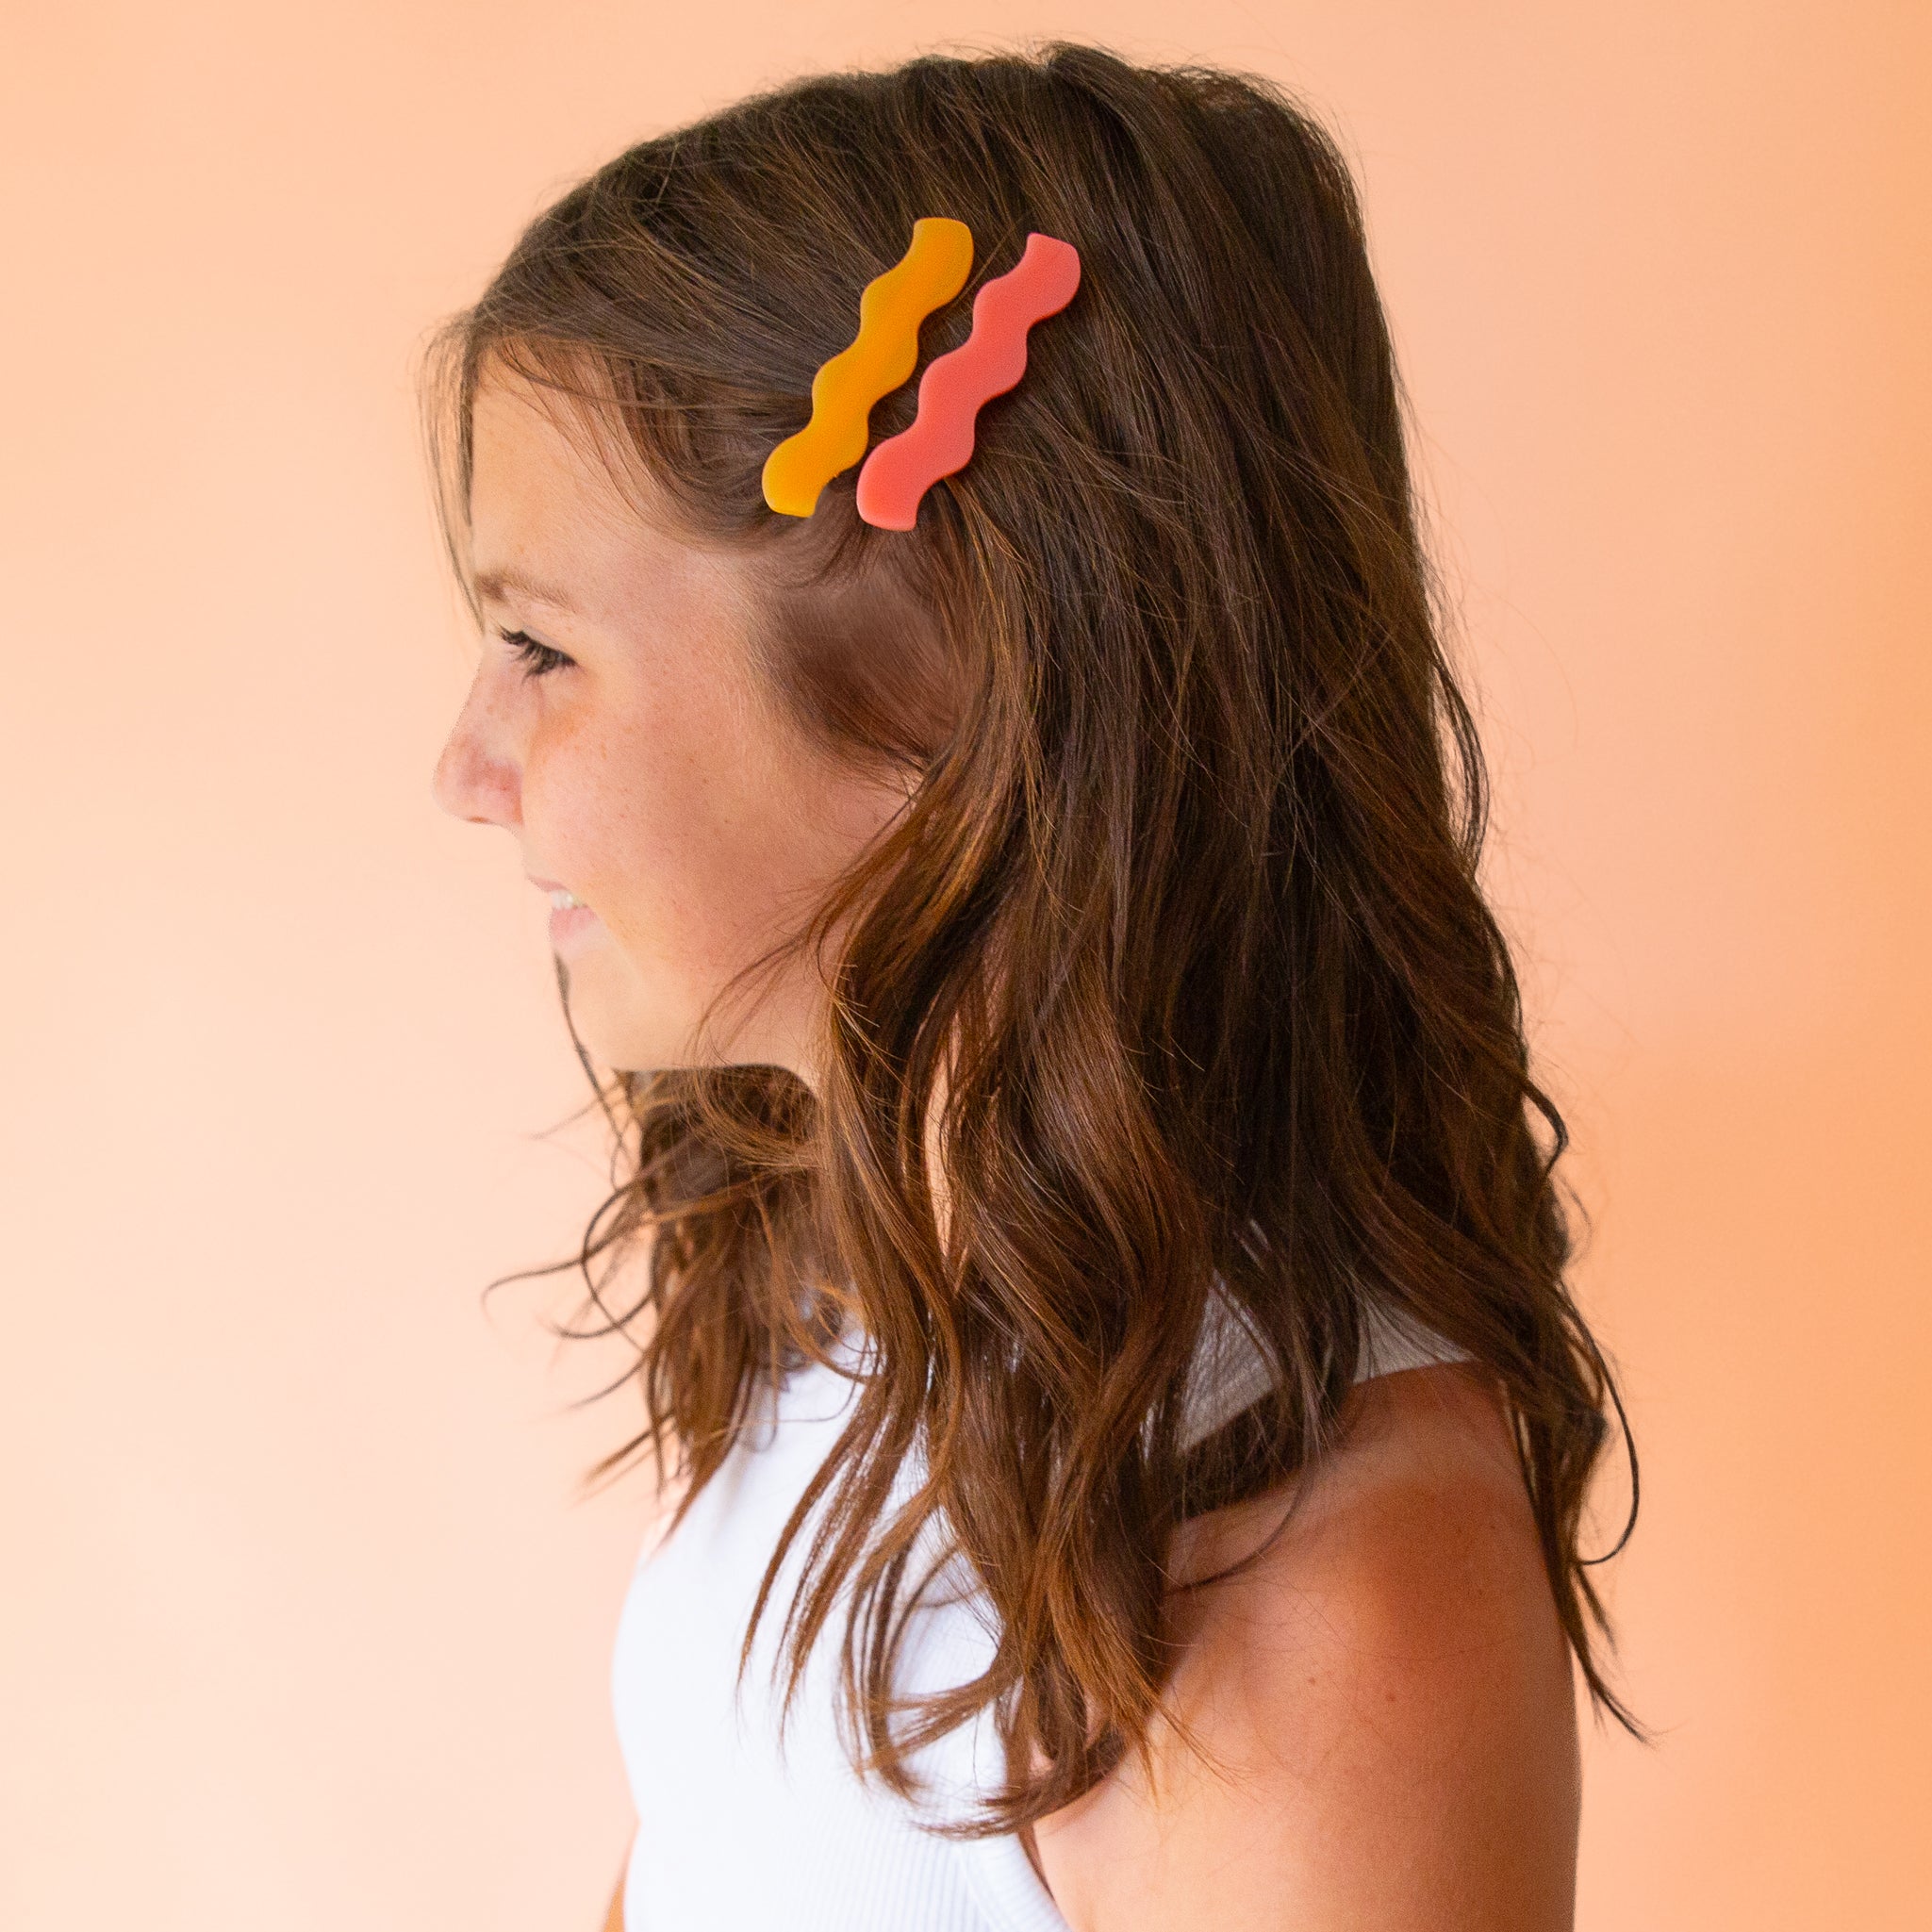 Two wavy hair clips in a tangerine shade and a pink color.